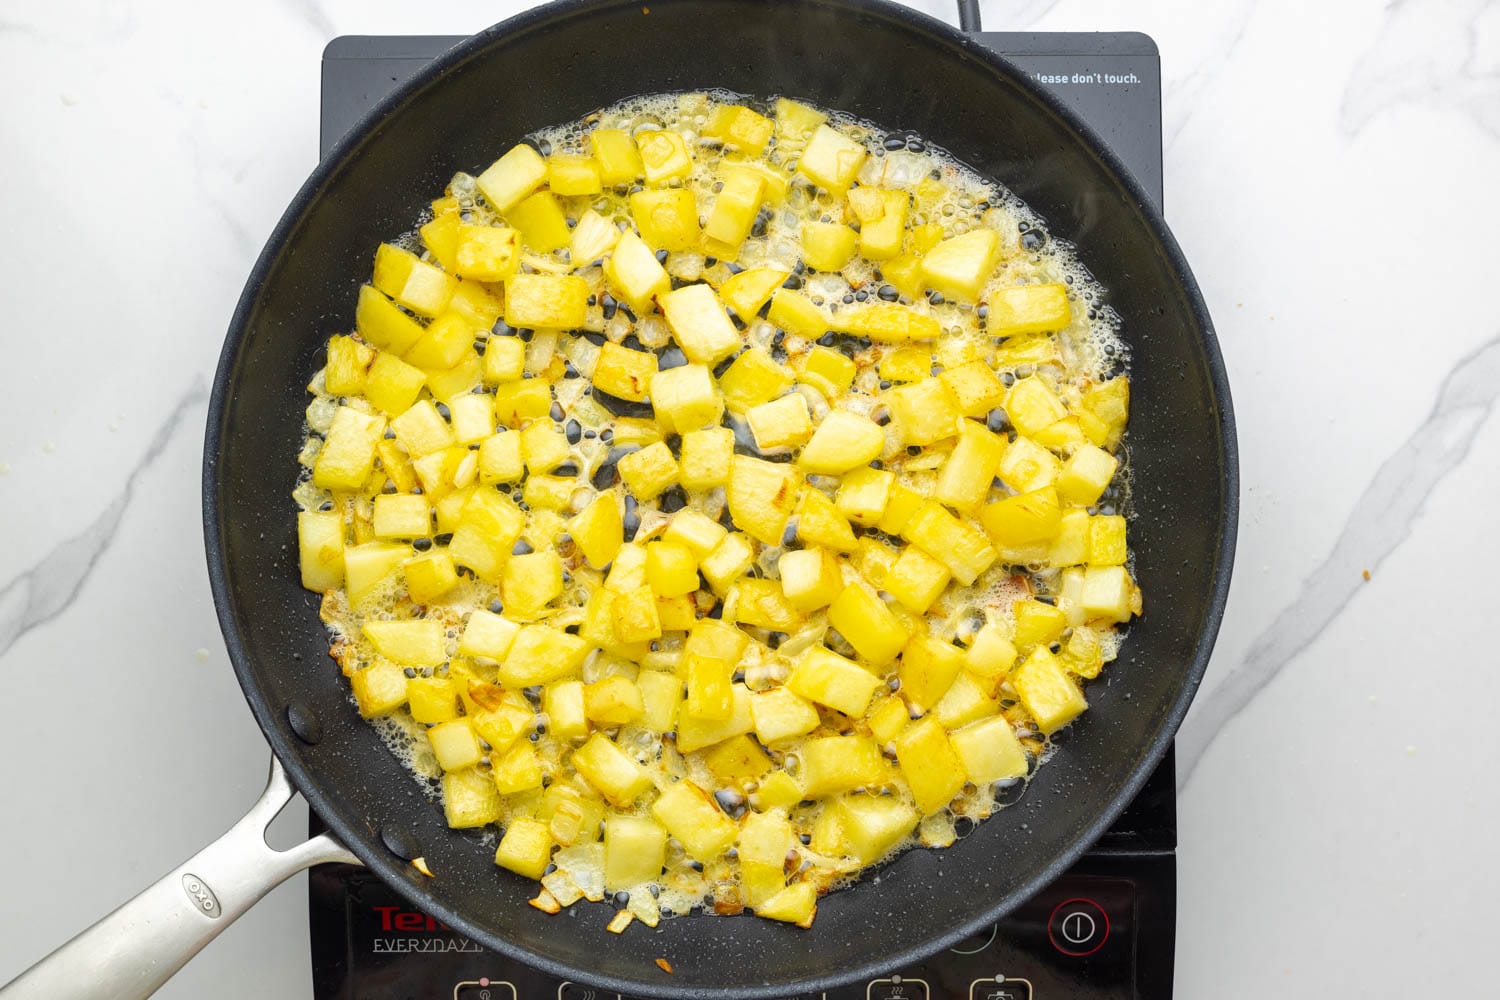 cooked diced potatoes and onions in a skillet over an electric burner.